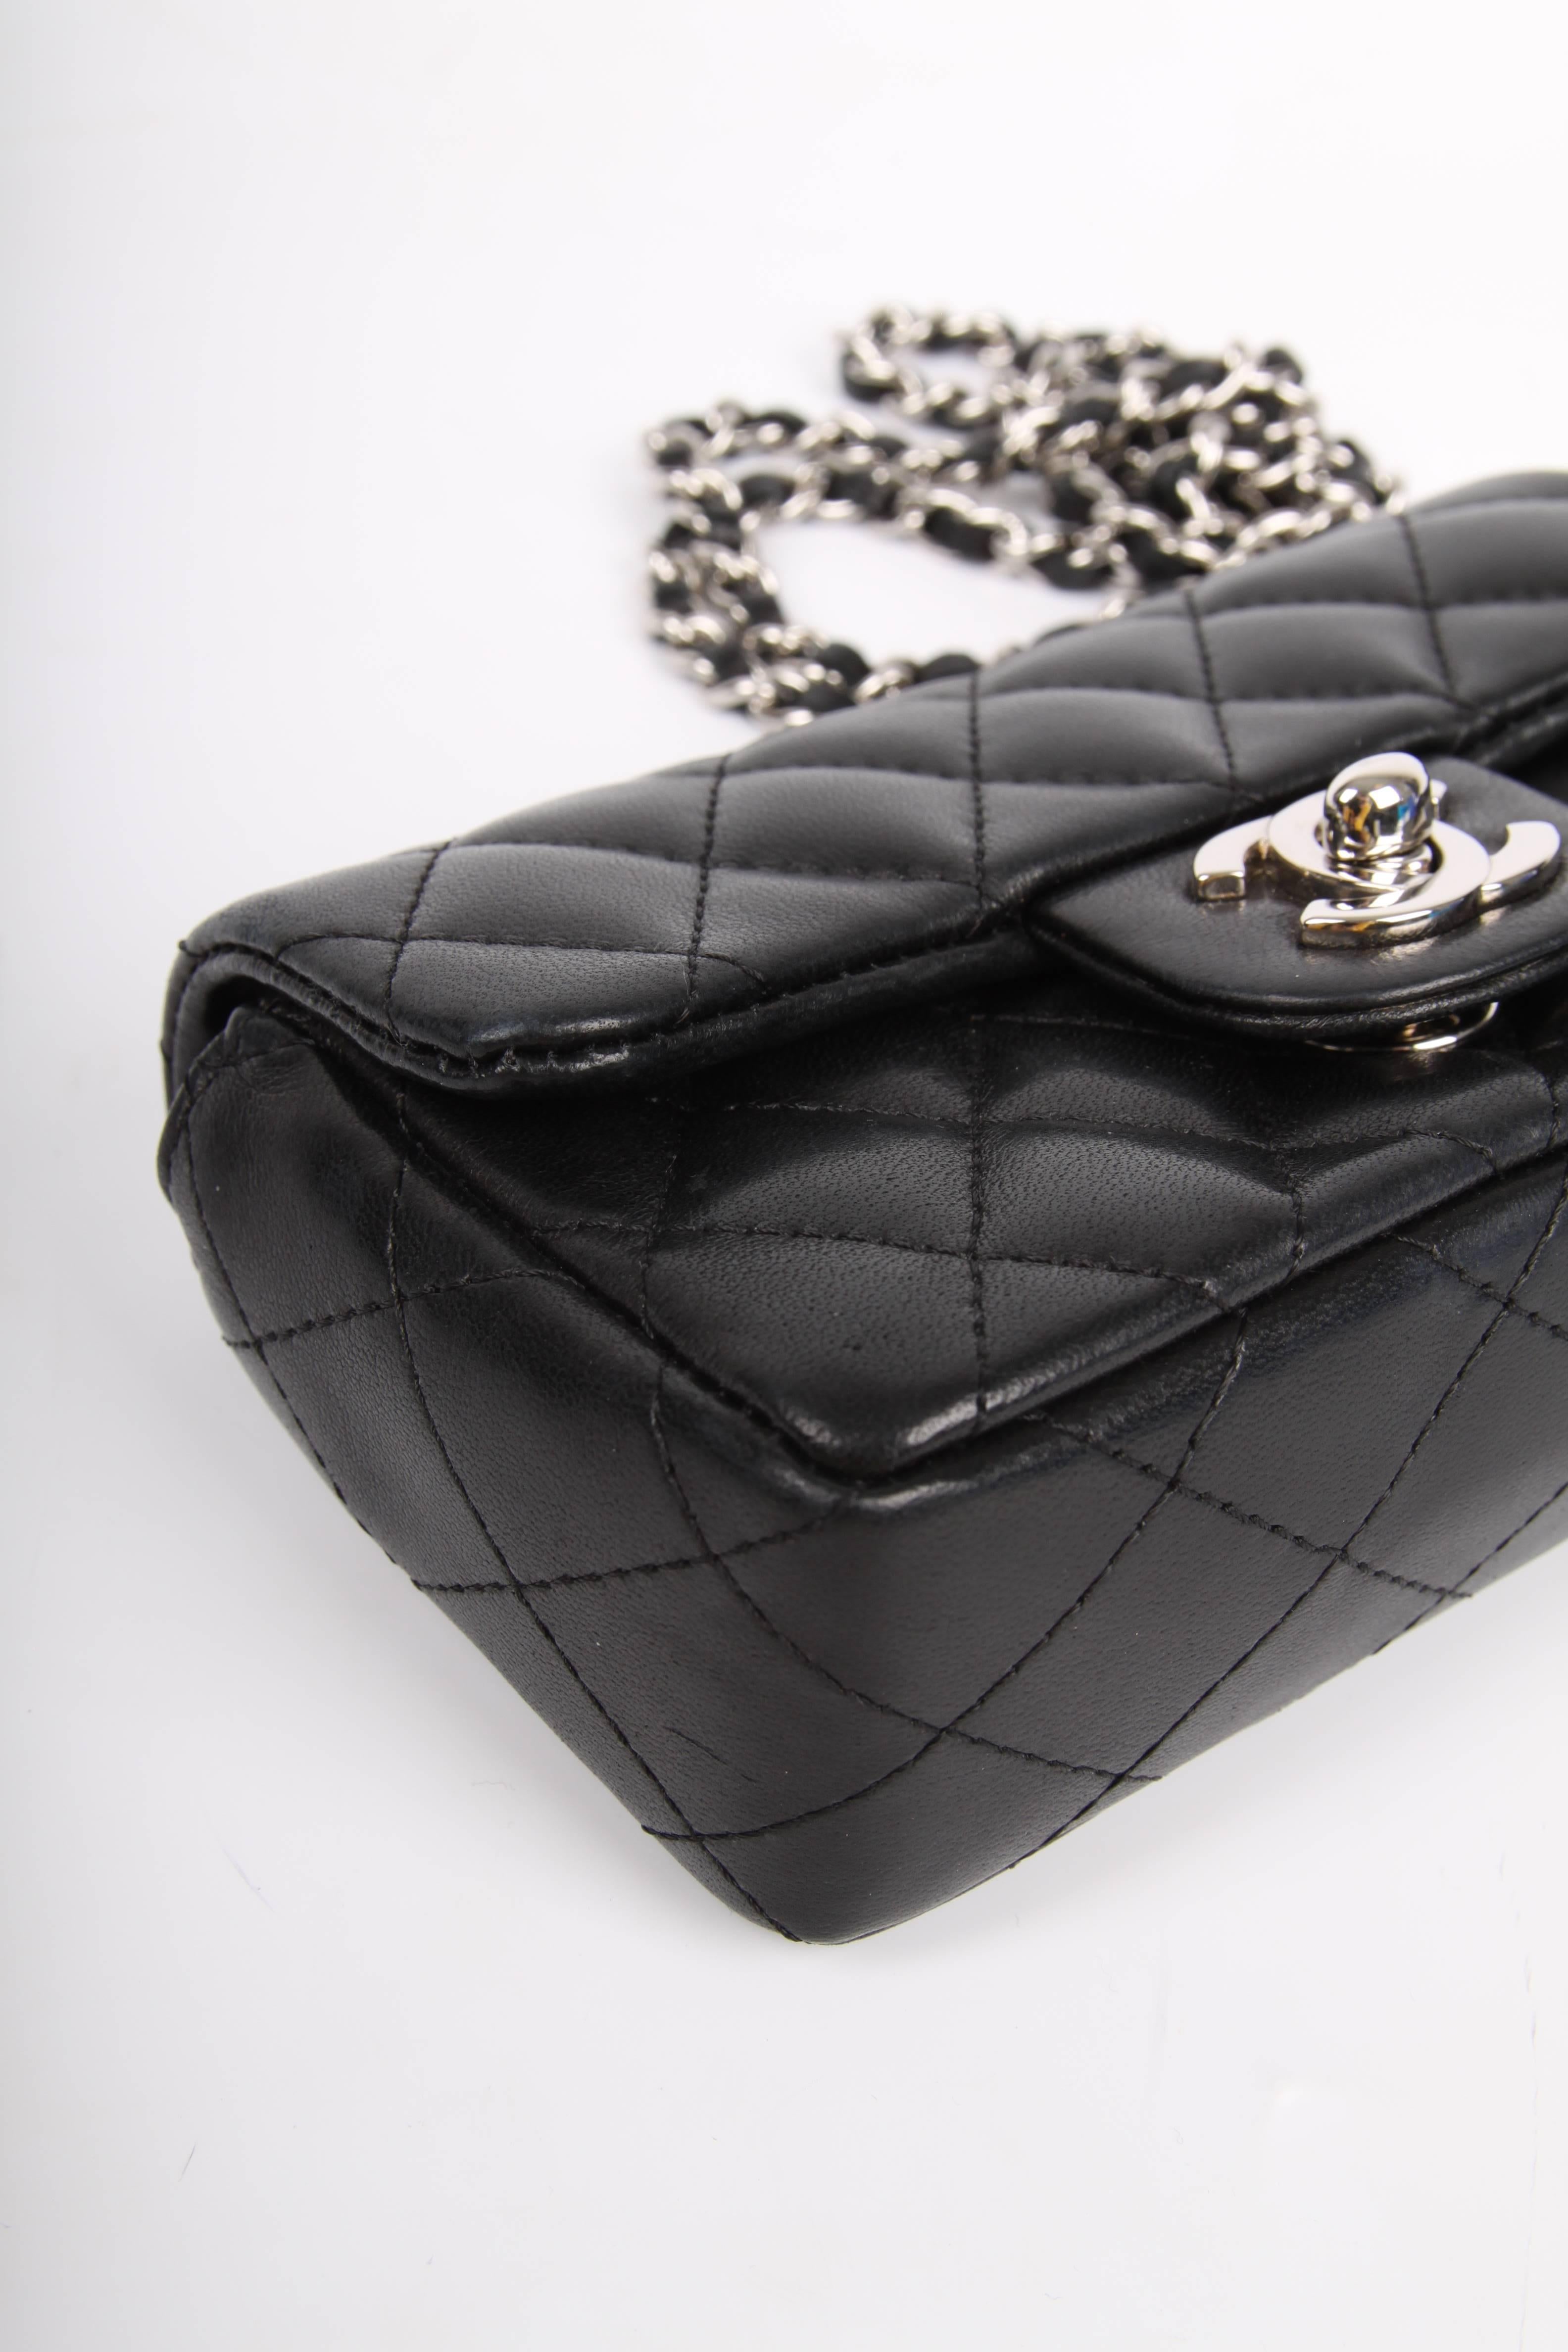 As sweet as candy! Micro Chanel bag in black leather. 

Magnificent bag, the leather is fully quilted. Silver-tone turnlock CC closure at the front and a silver-tone chain that measures 122 centimeters and is entwined with black leather. Long enough